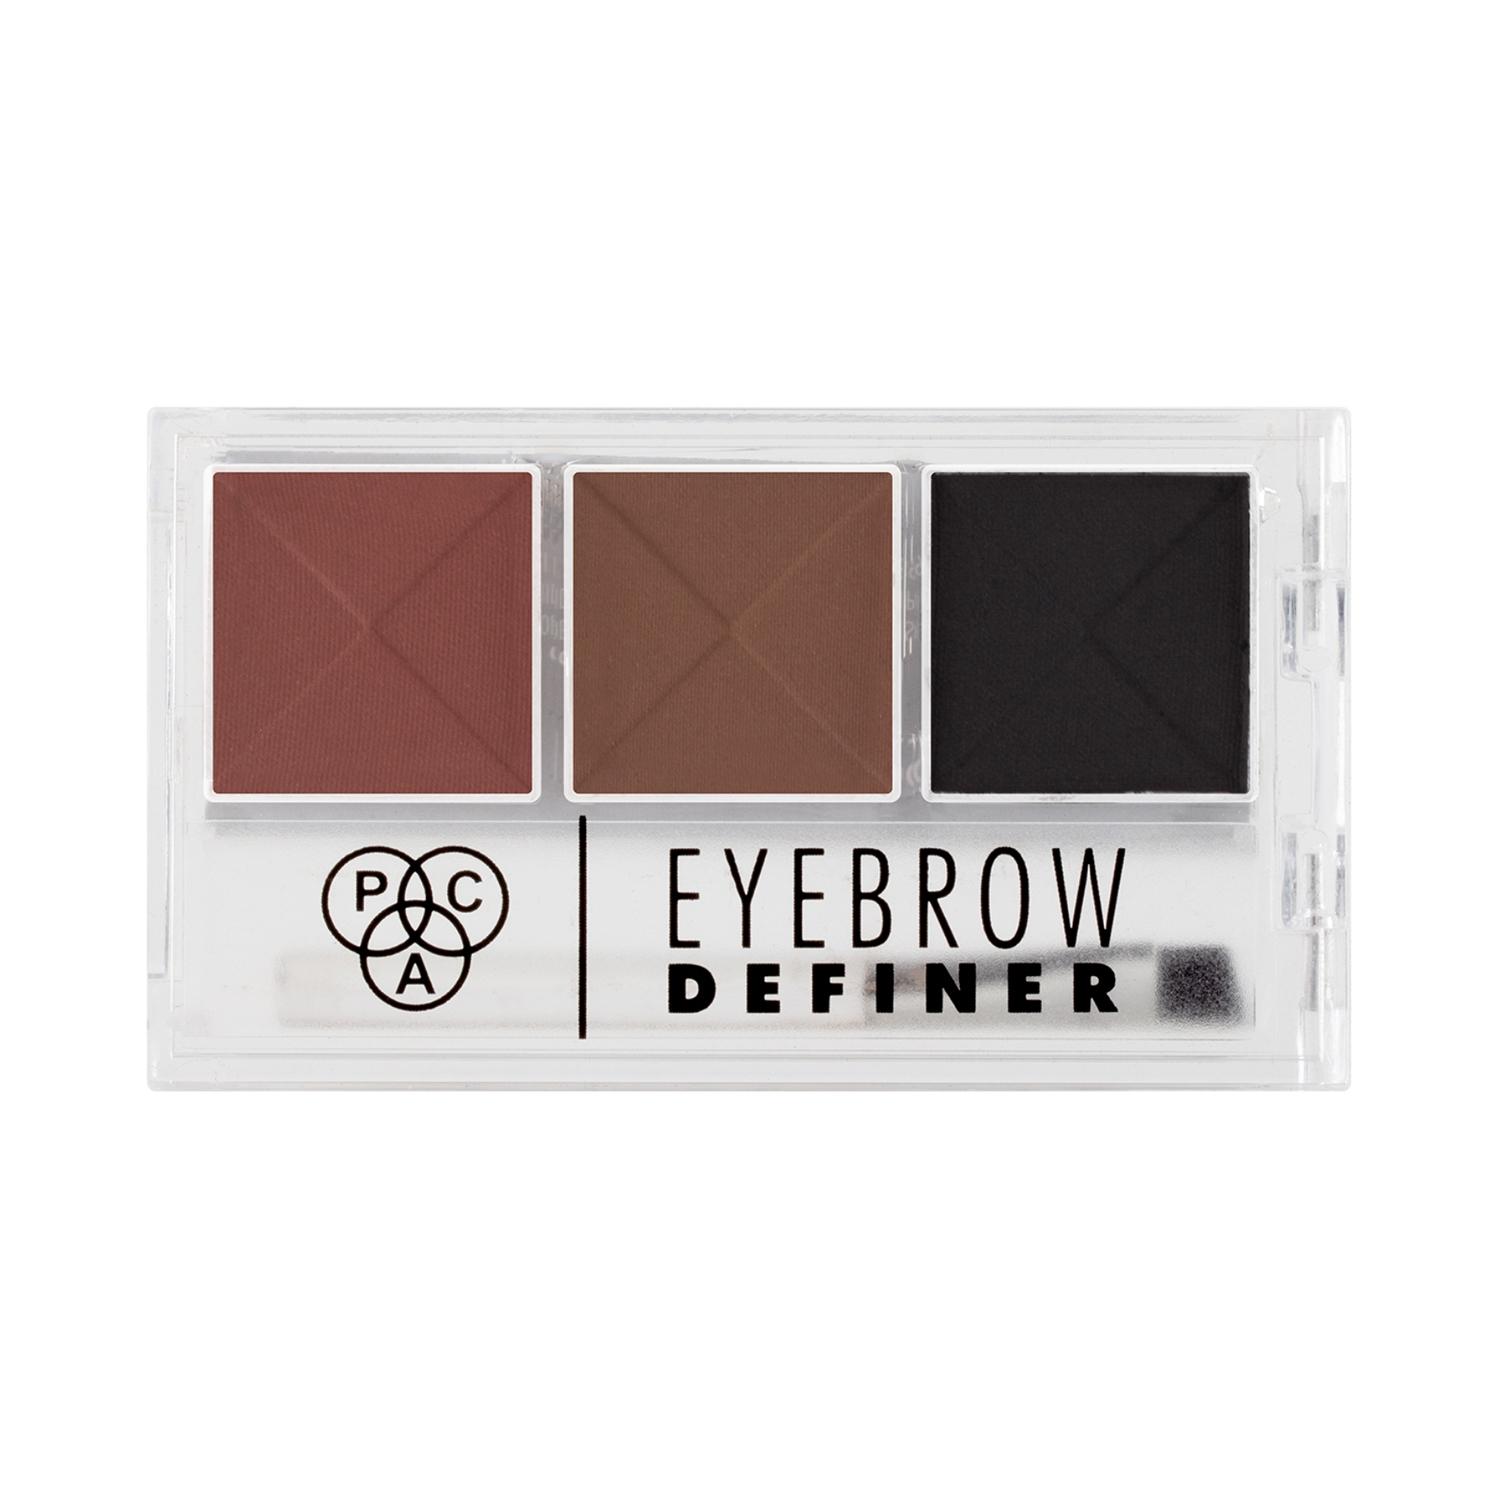 pac eyebrow definer - 3 colors (2.5g)